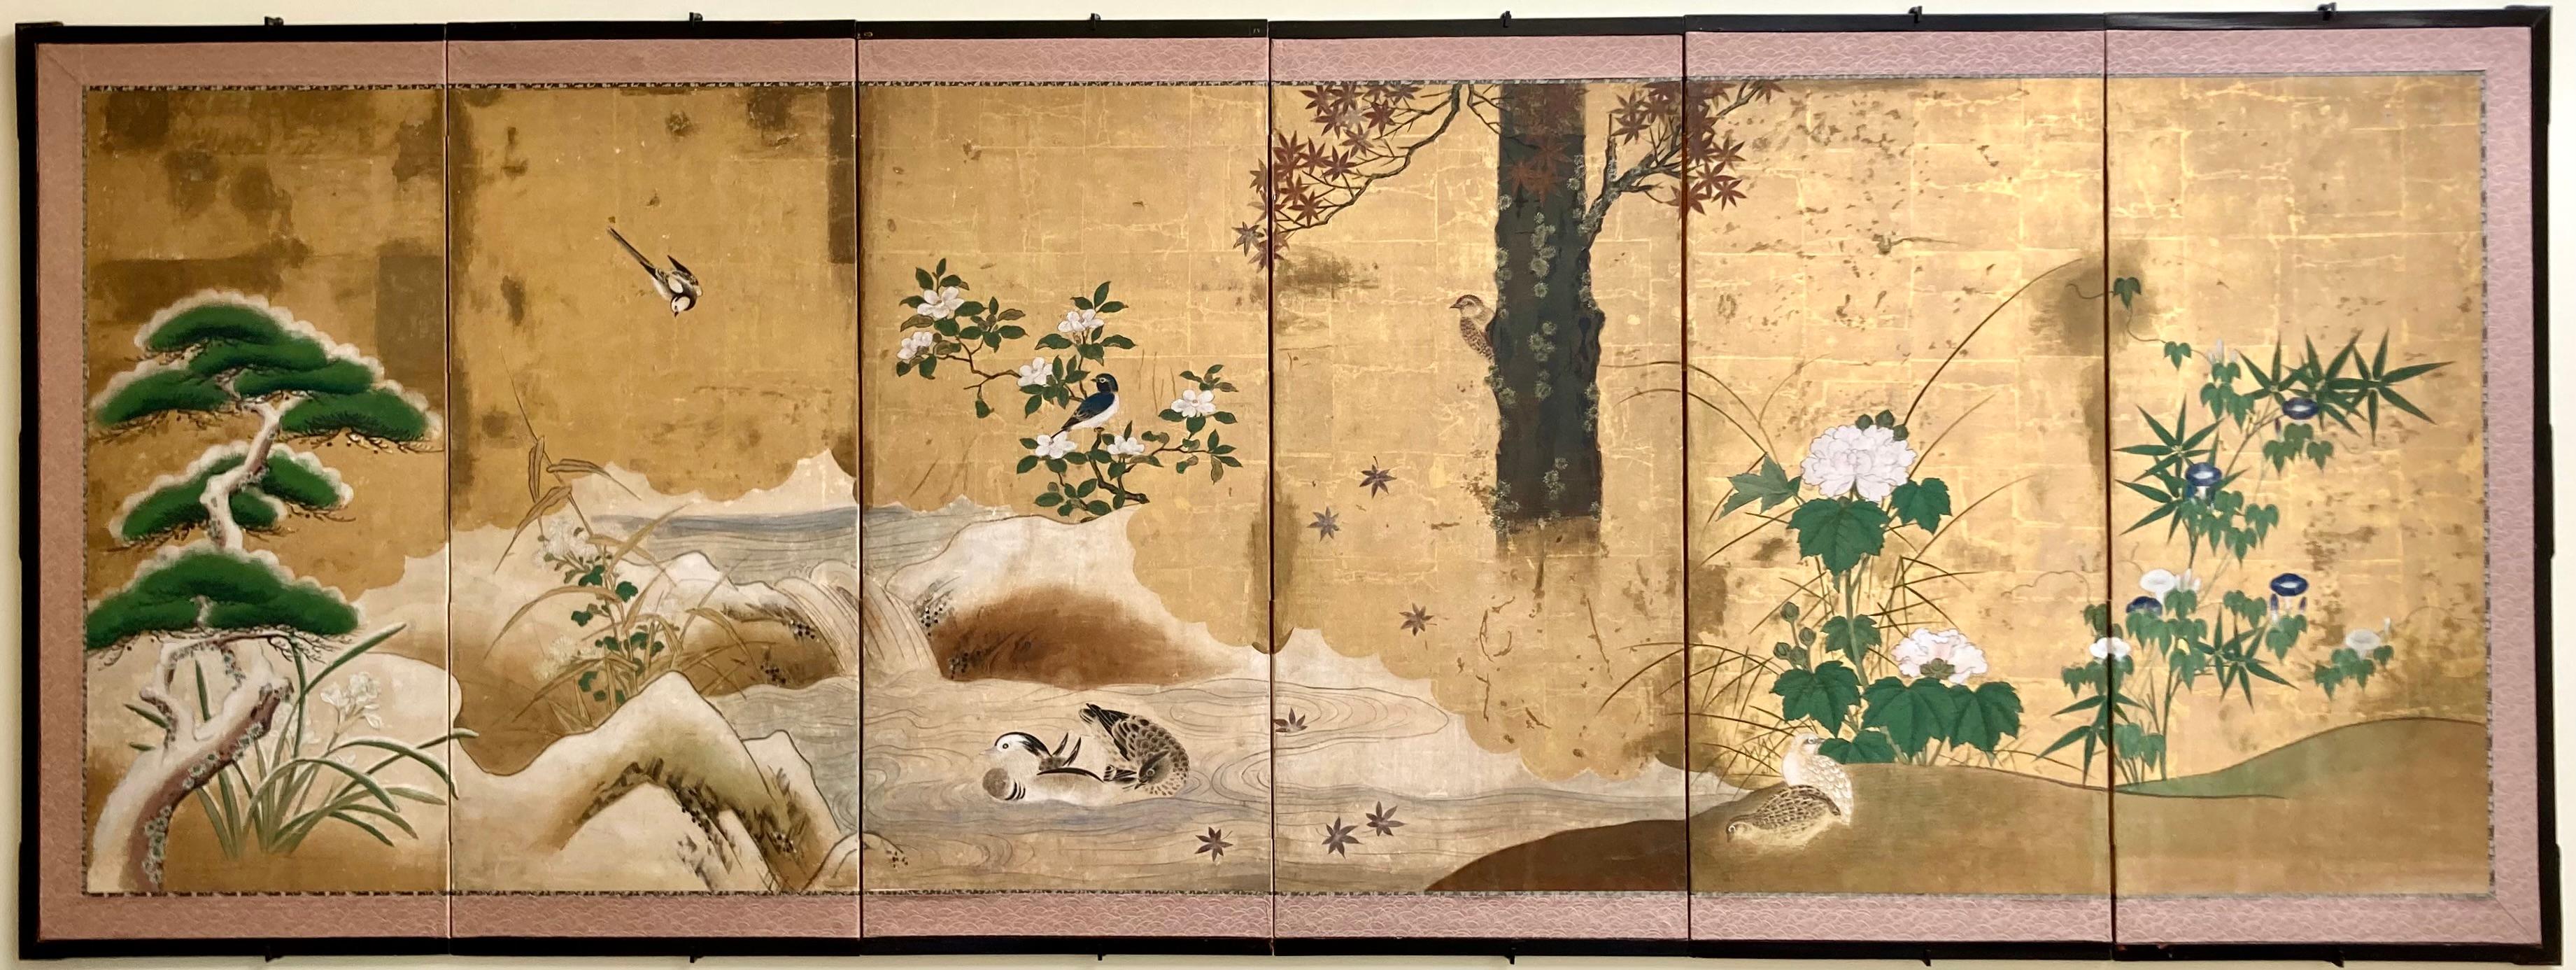 A fine Edo (Tokugawa) period Japanese antique six panel folding screen in sumi (black ink) and colors on gold leaf applied paper, mounted on wooden frames with paper hinges, the textile border with lacquered molding. The screen depicts pairs of